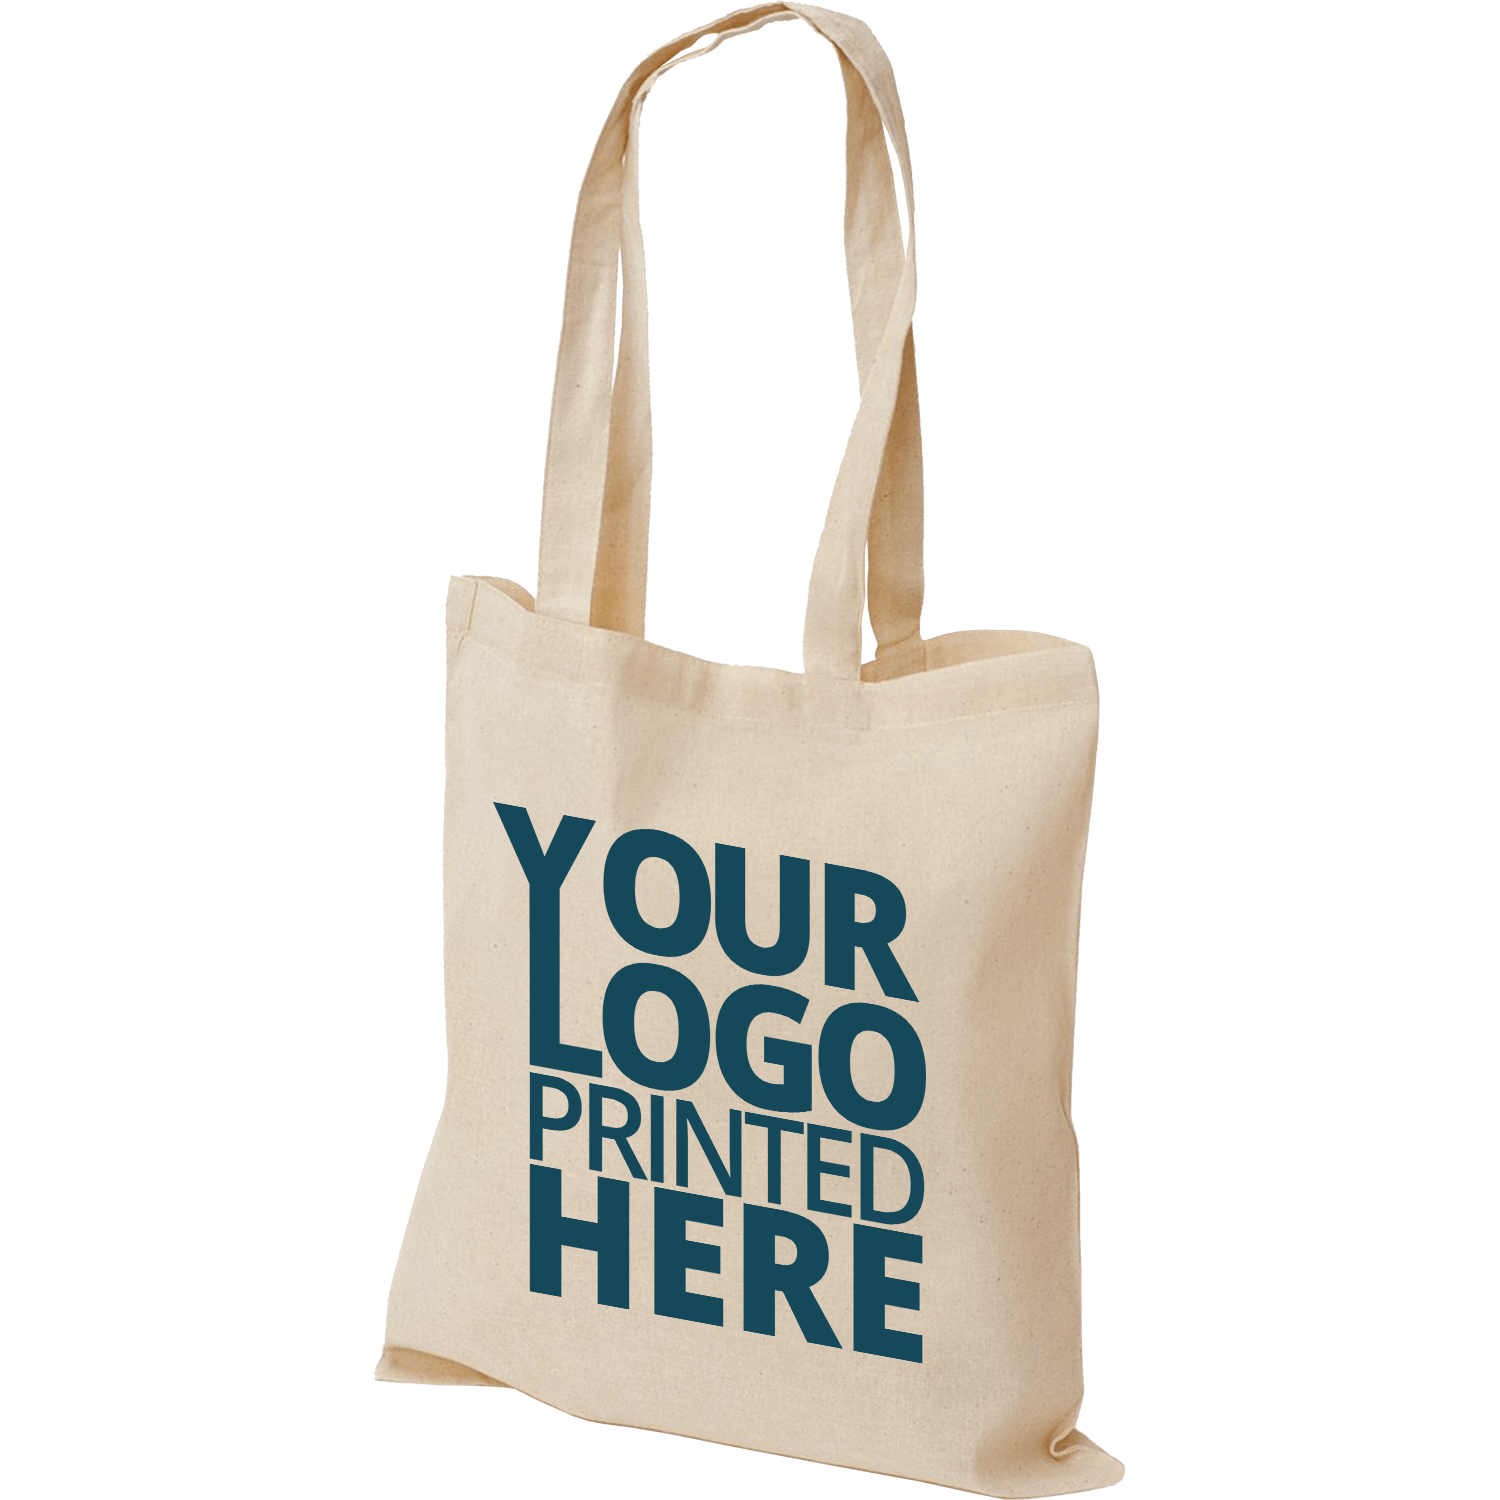 Branded Tote Bags Online India / Redefine your bag selection with this ...